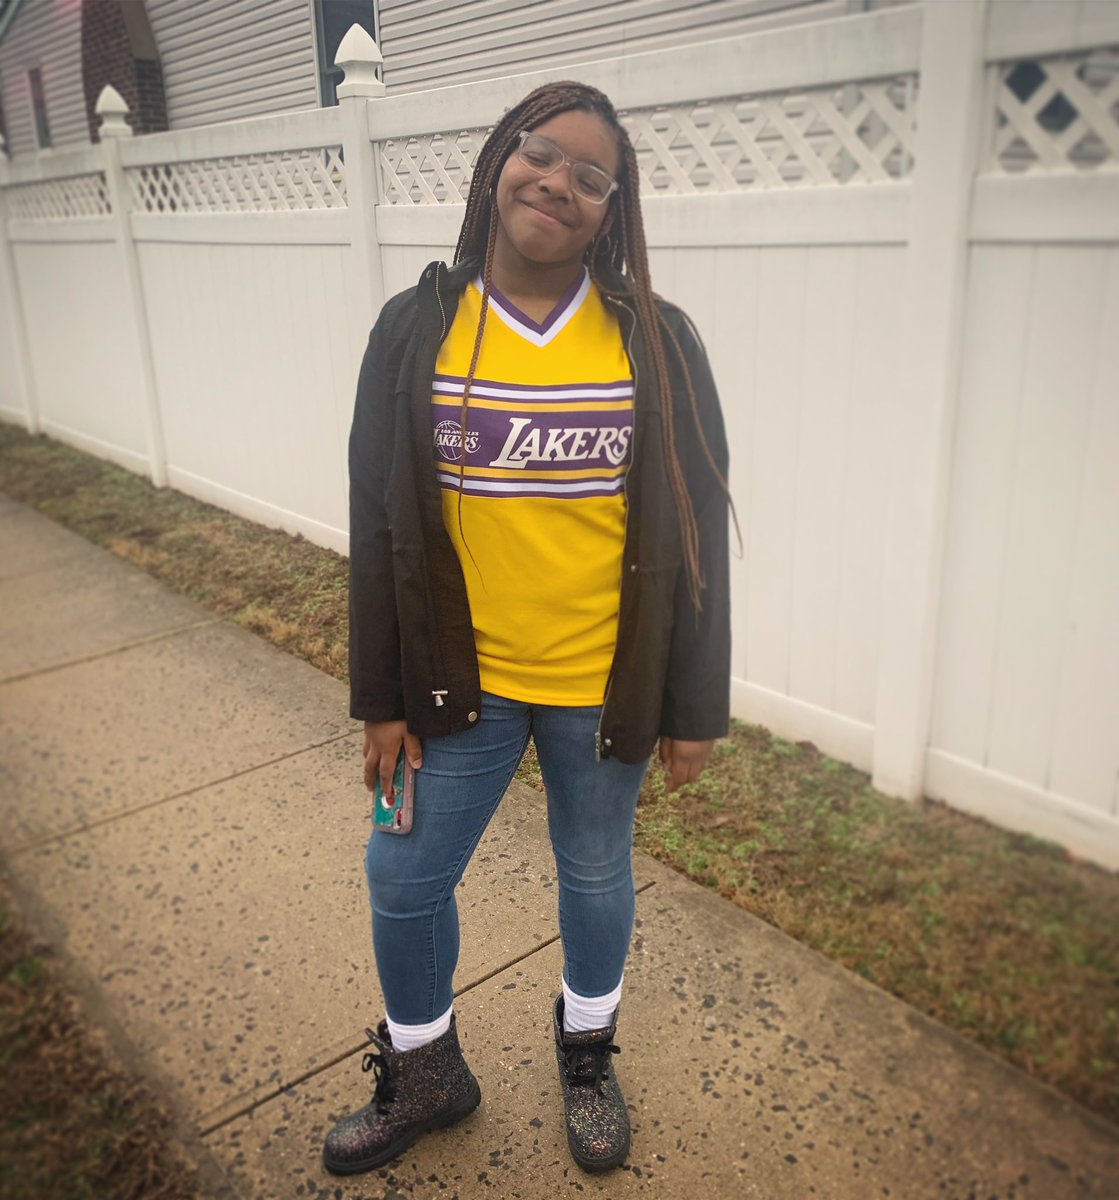 Only decent pic with her eyes barely opened 😂🙄🤦🏽‍♀️ (she hate taking pics) #KobeDay #8 #24 #2 #yellowpurple #lakers #teamgianna #mambamentality #mambaforever #TeamAcademy #KippNJ #weloveyoukobe💜💛